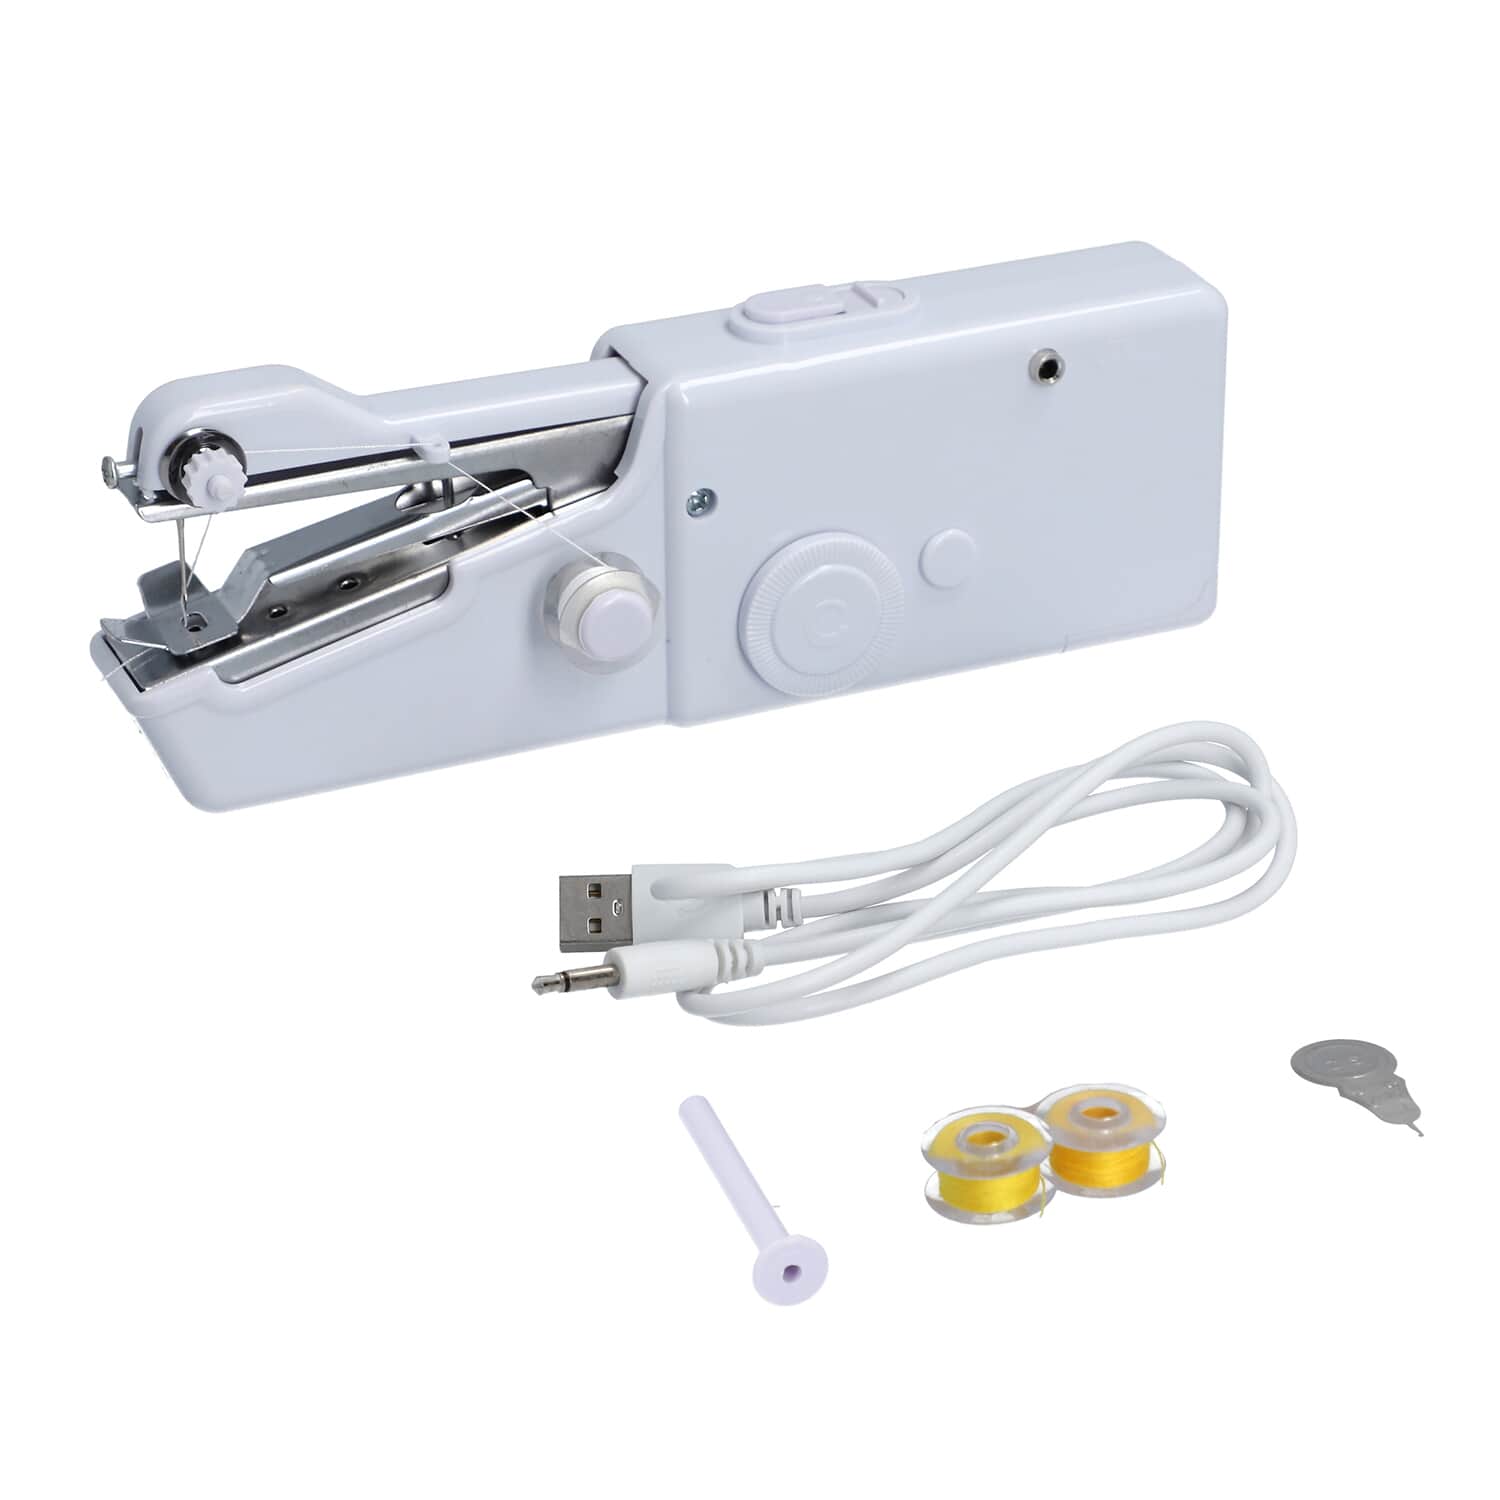 Shop LC White Handy Stitch Portable Mini Mending Handheld Sewing Machine, Size: 4x1.5V Inches